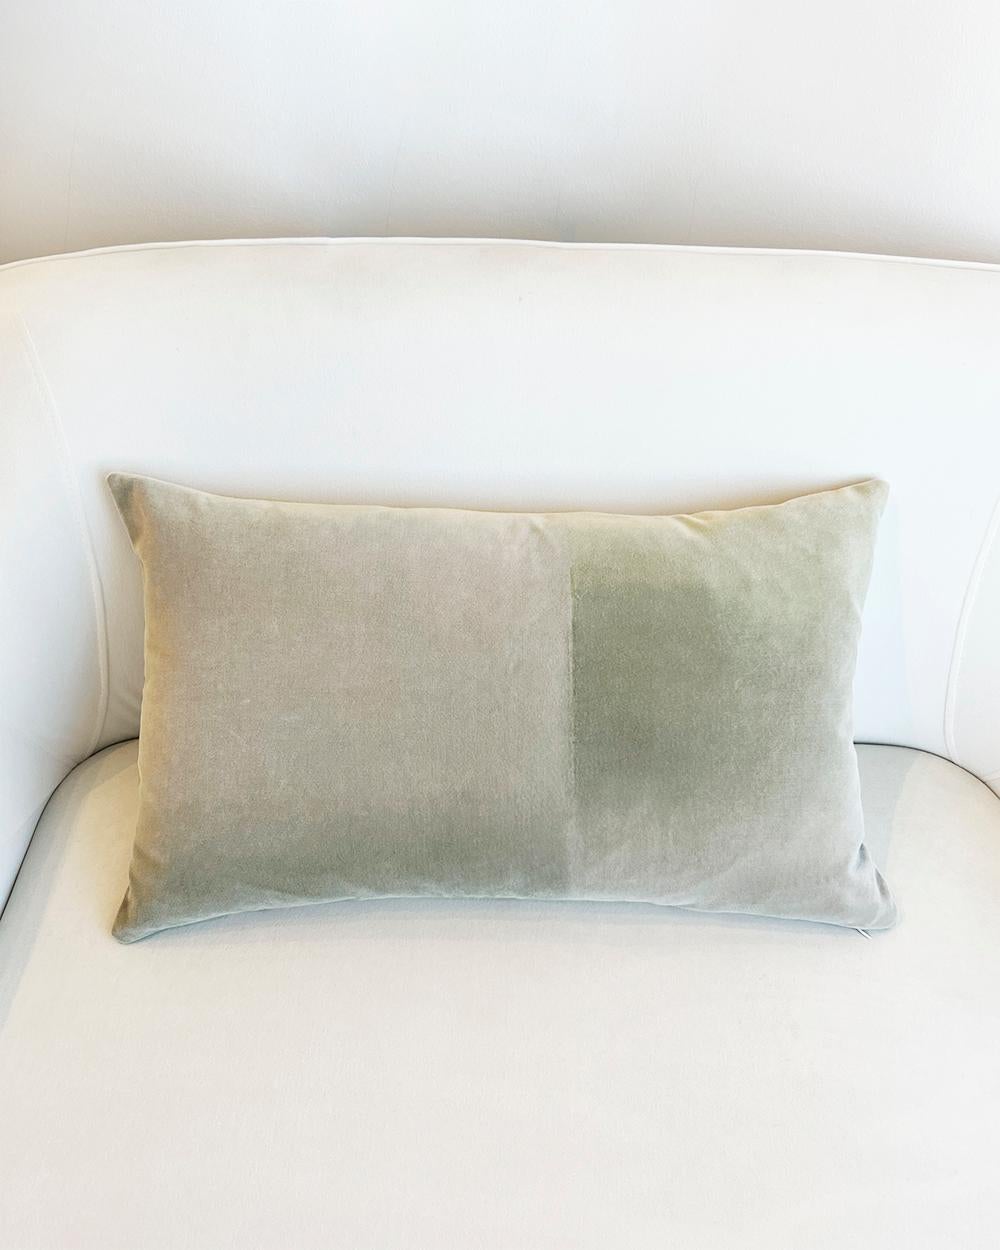 Espanyolet Hand-Painted Vintage Velvet Throw Pillow in Moss Green 16